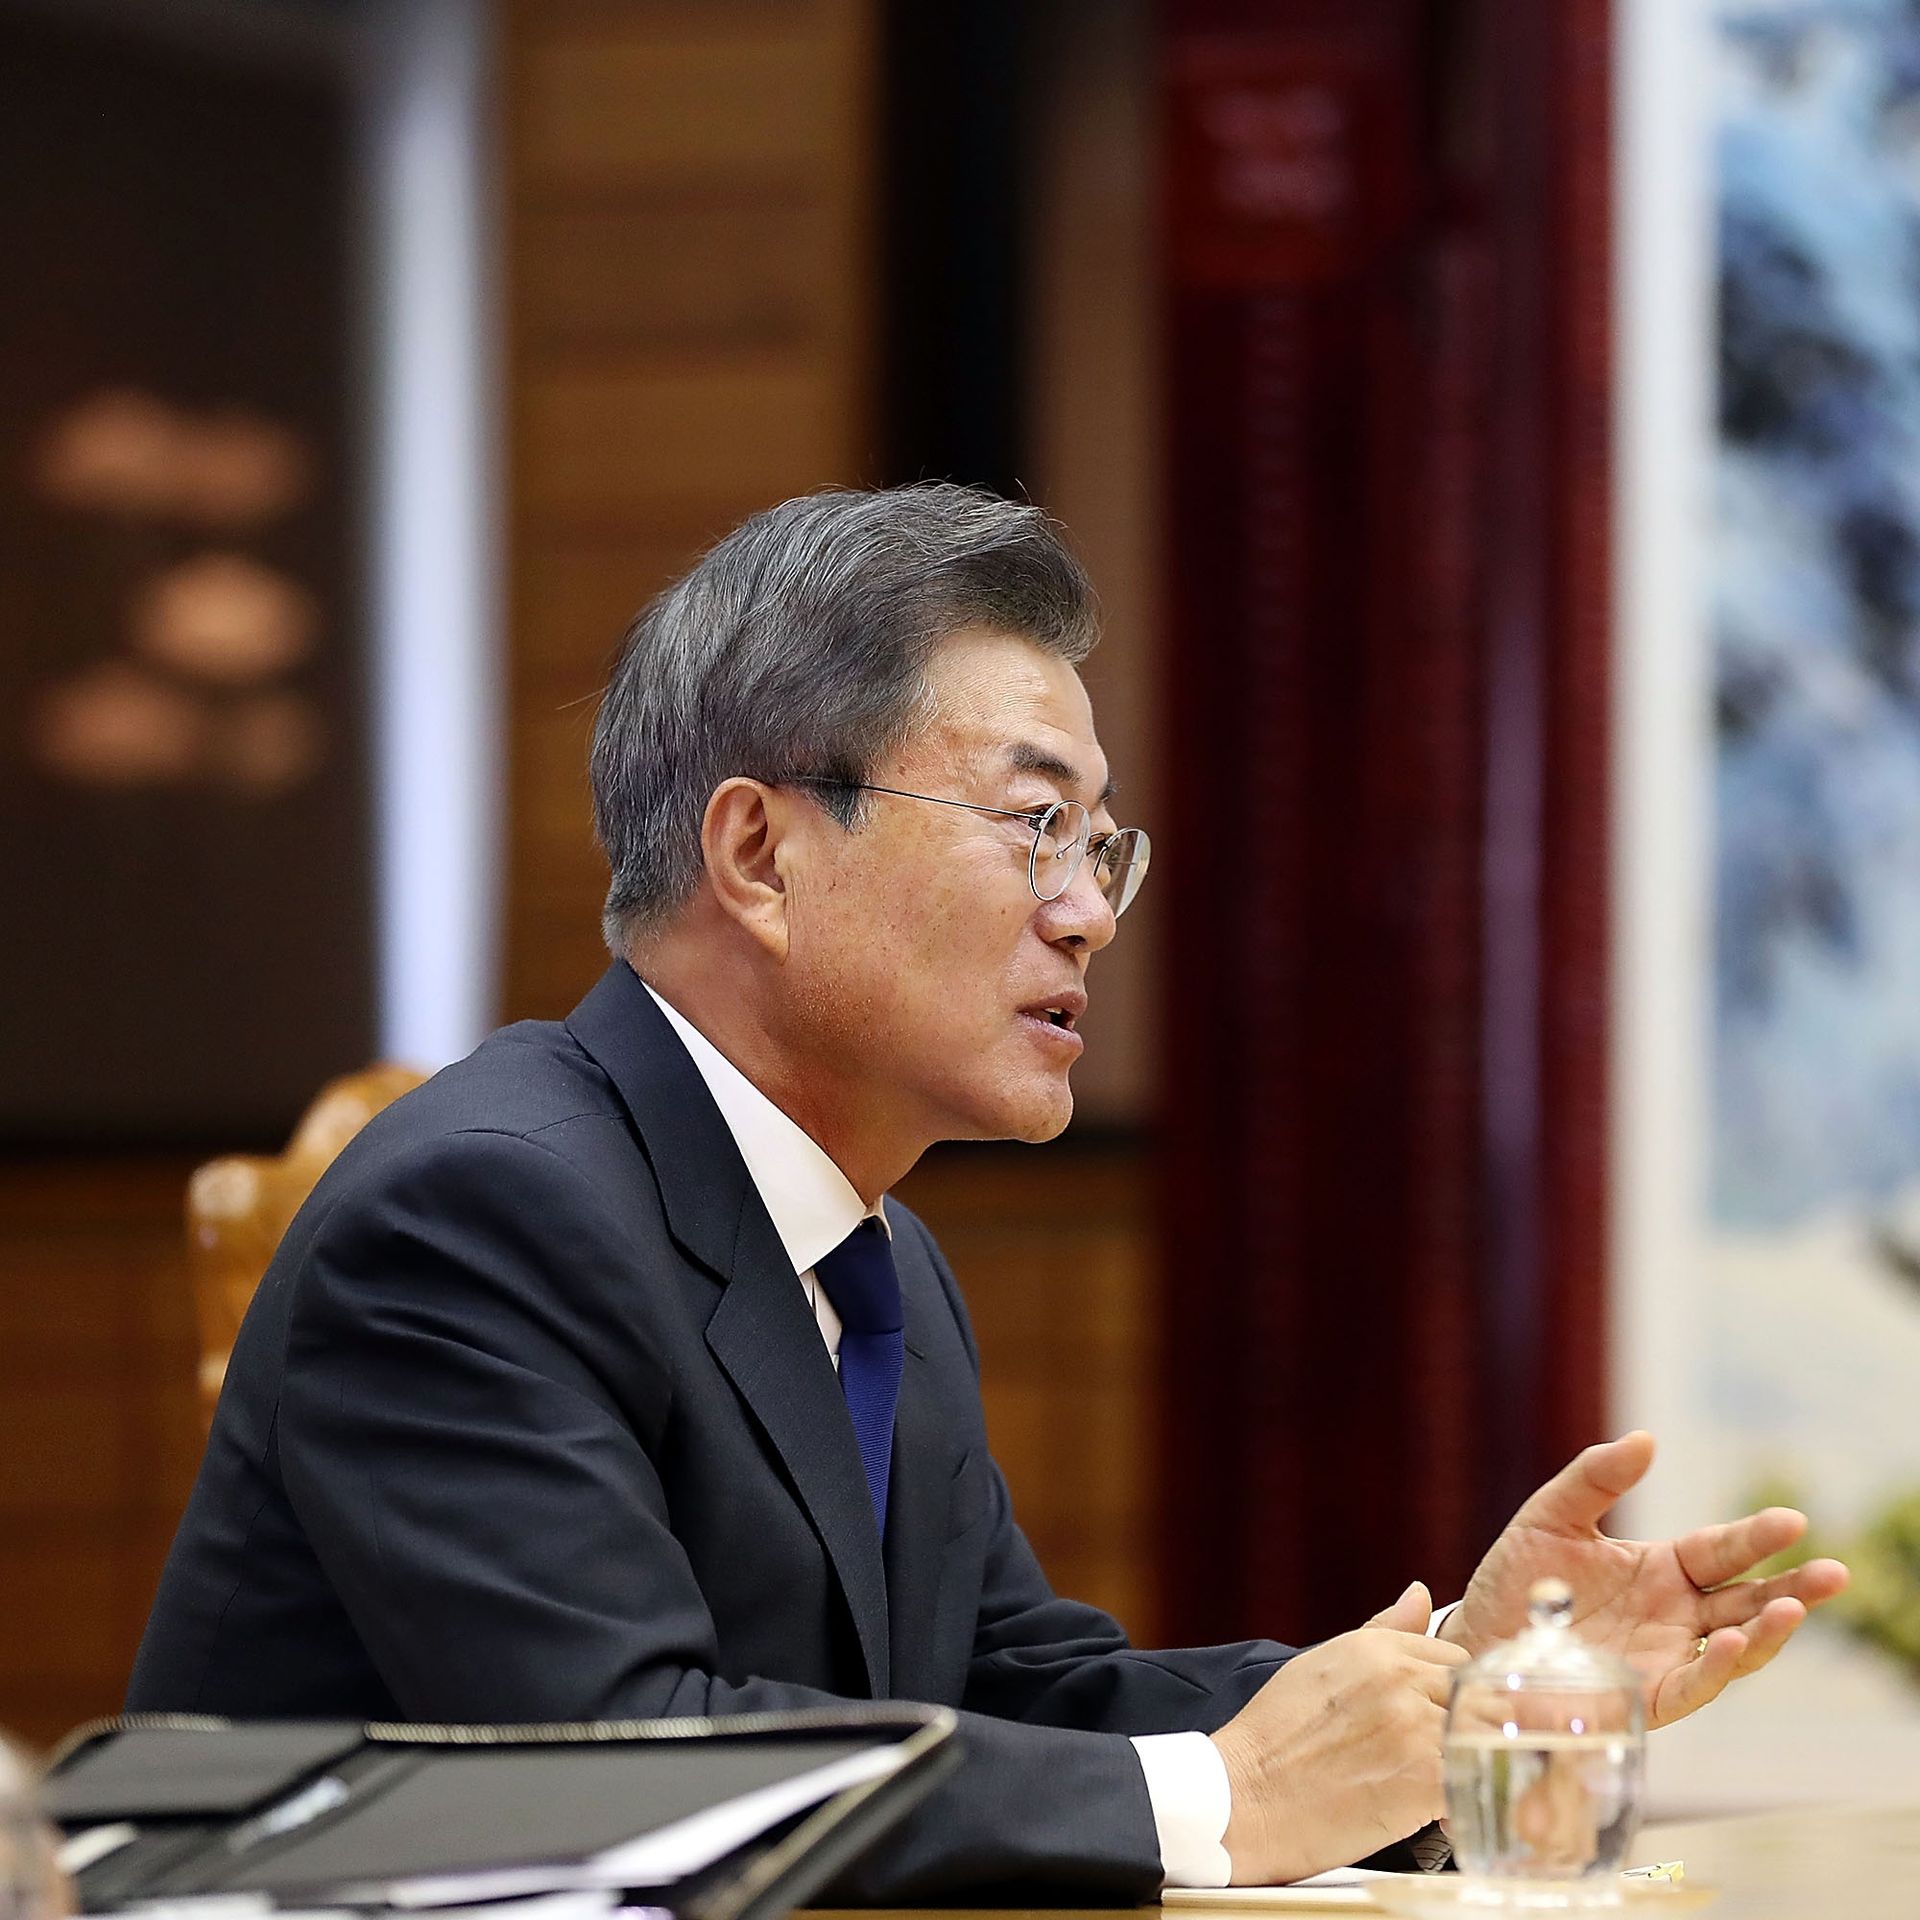  South Korean President Moon Jae-in talks with North Korean leader Kim Jong-un (not pictured).